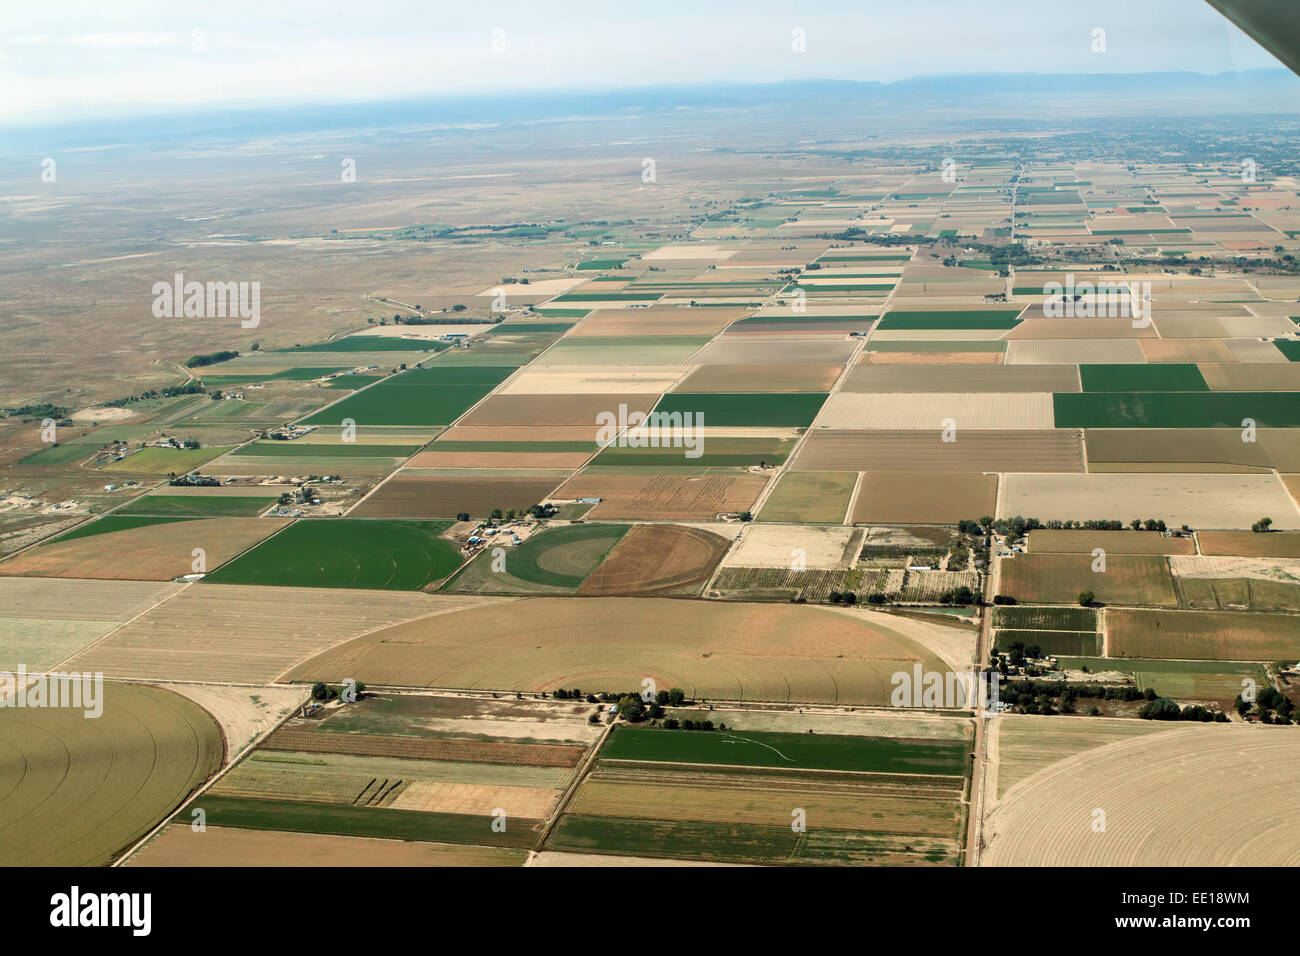 Irrigated farmlands near Avondale, Colorado. Just below the center point is a design in a crop - likely a corn maze. Stock Photo